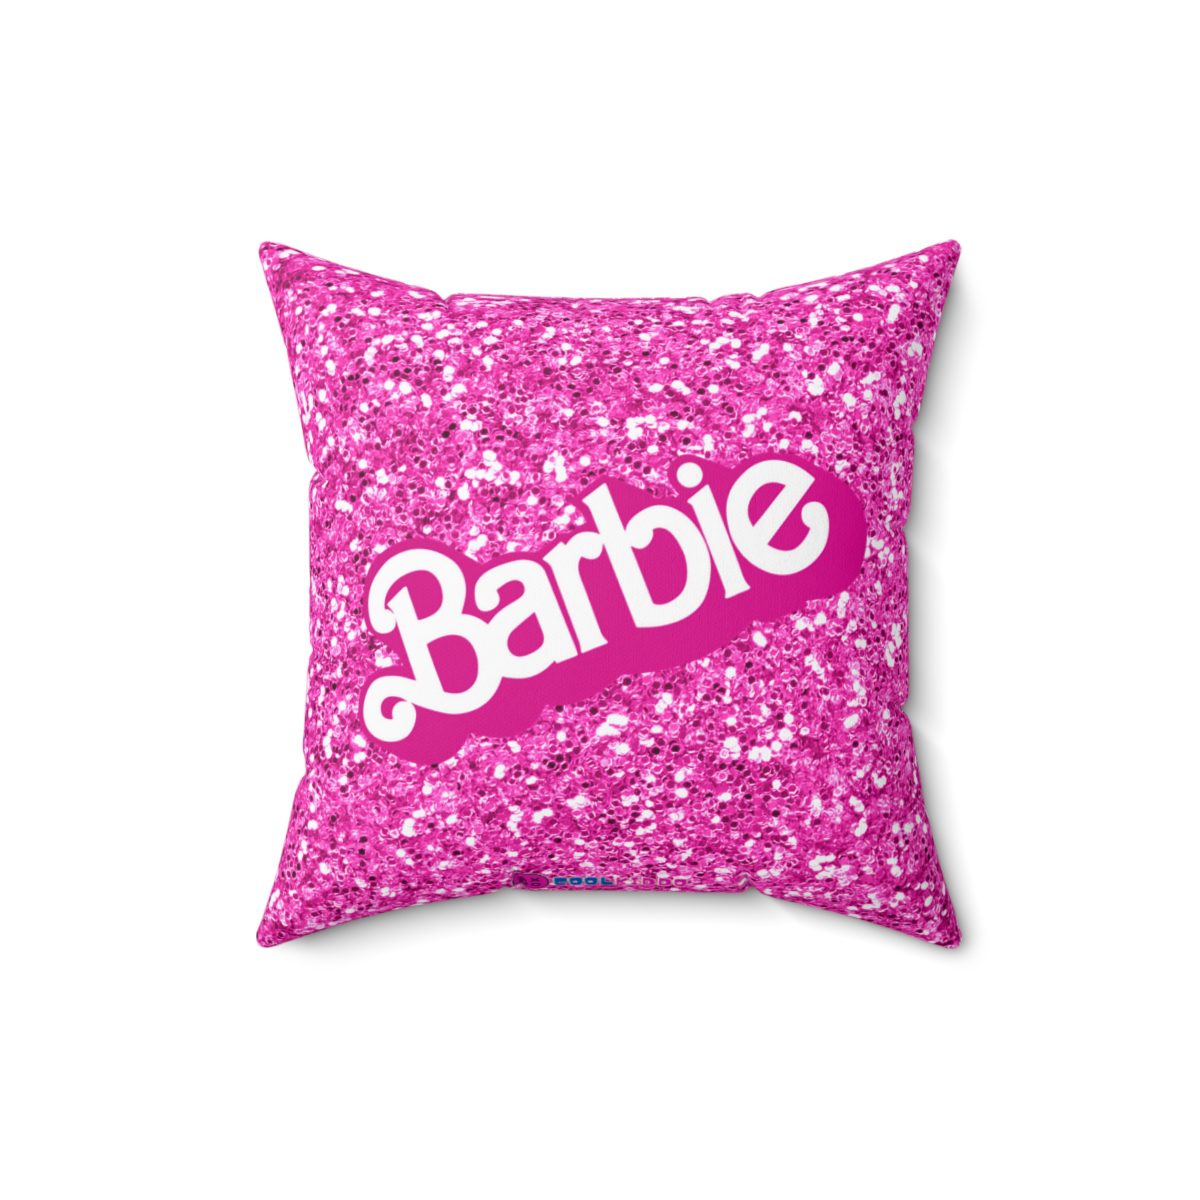 Barbie Glitter Simulation Pink Cushion: Double-Sided Sparkle for Stylish Comfort Cool Kiddo 20